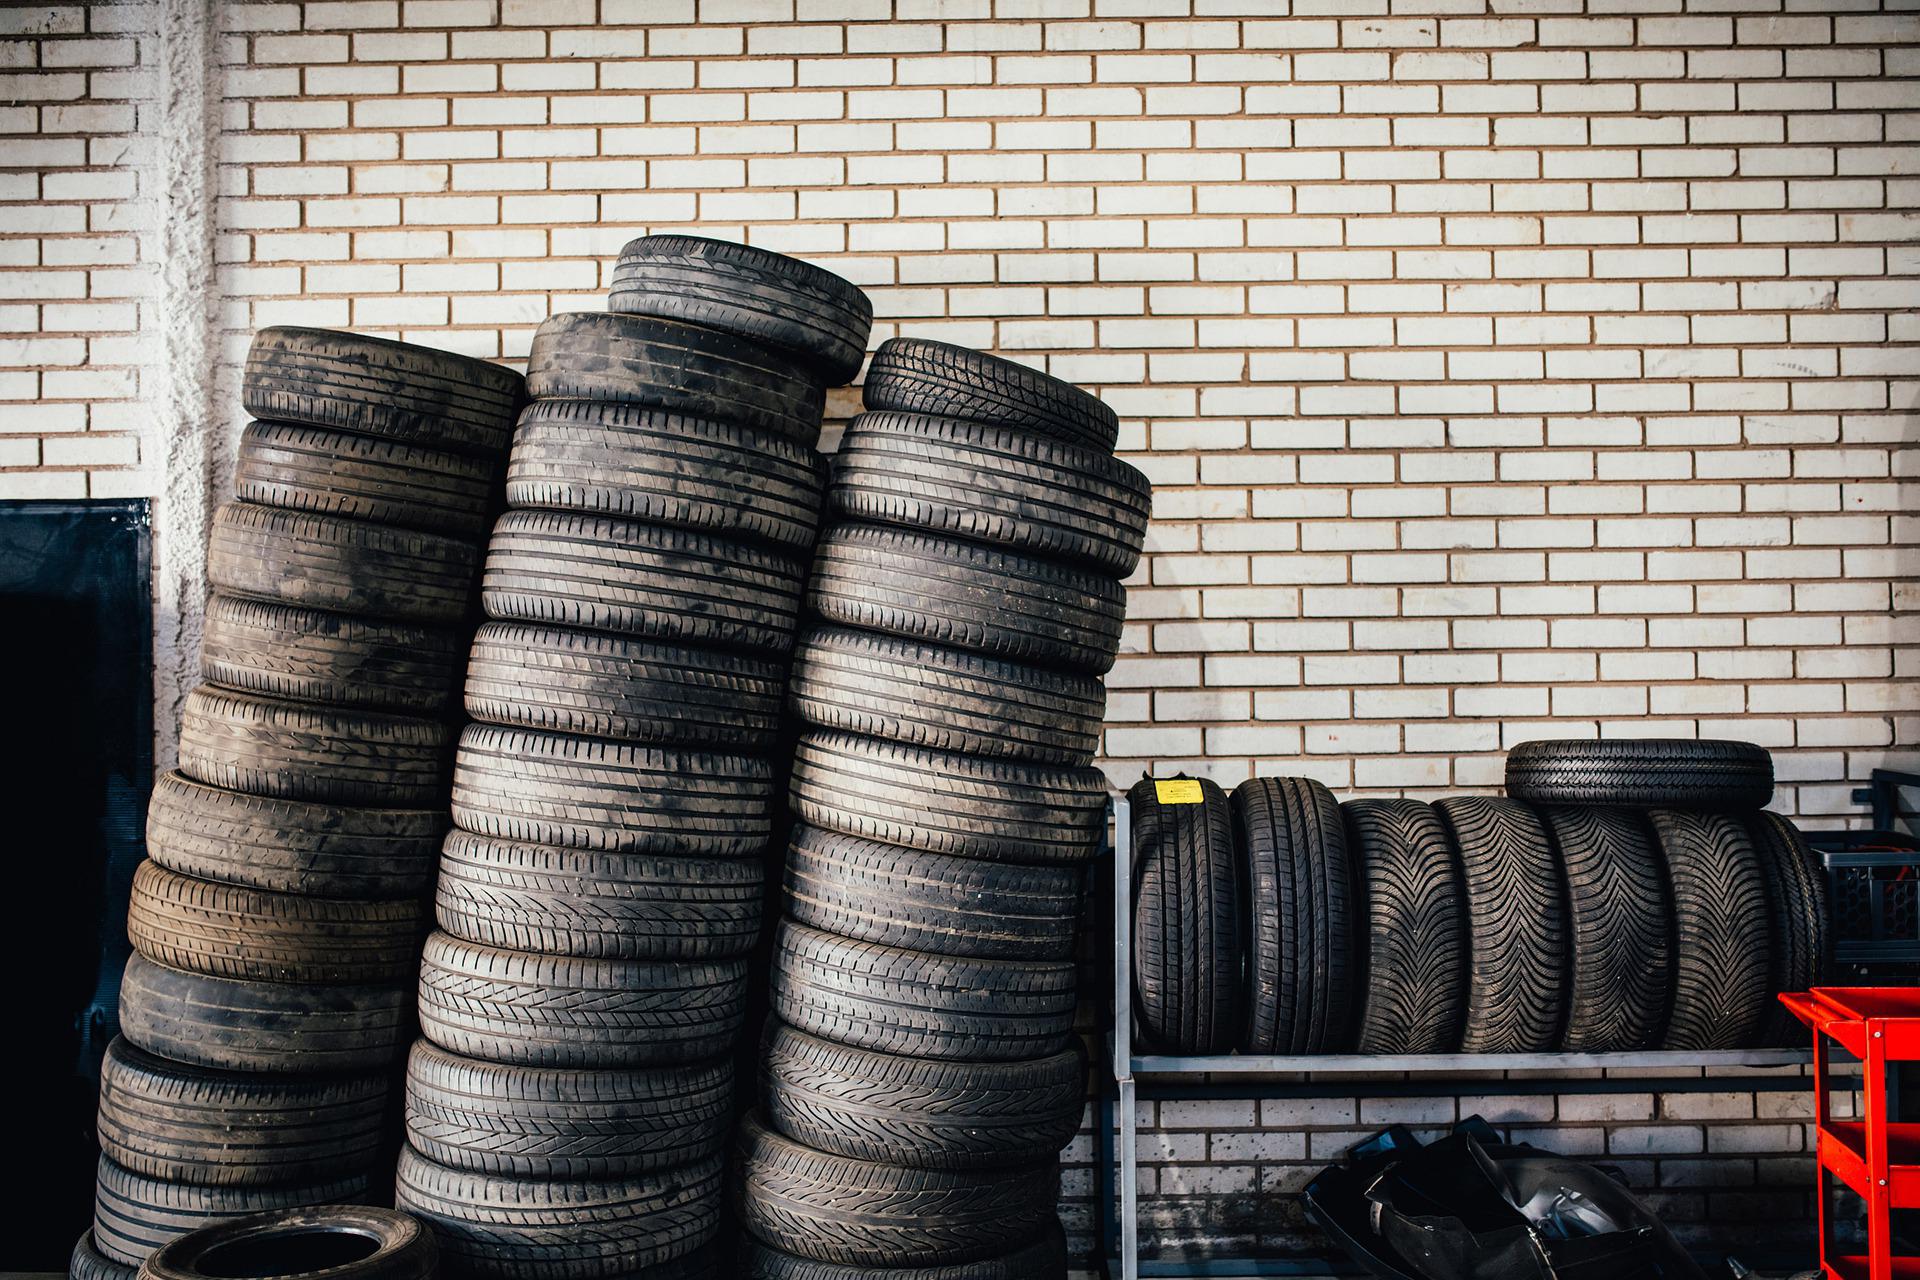 A stack of tires in a garage